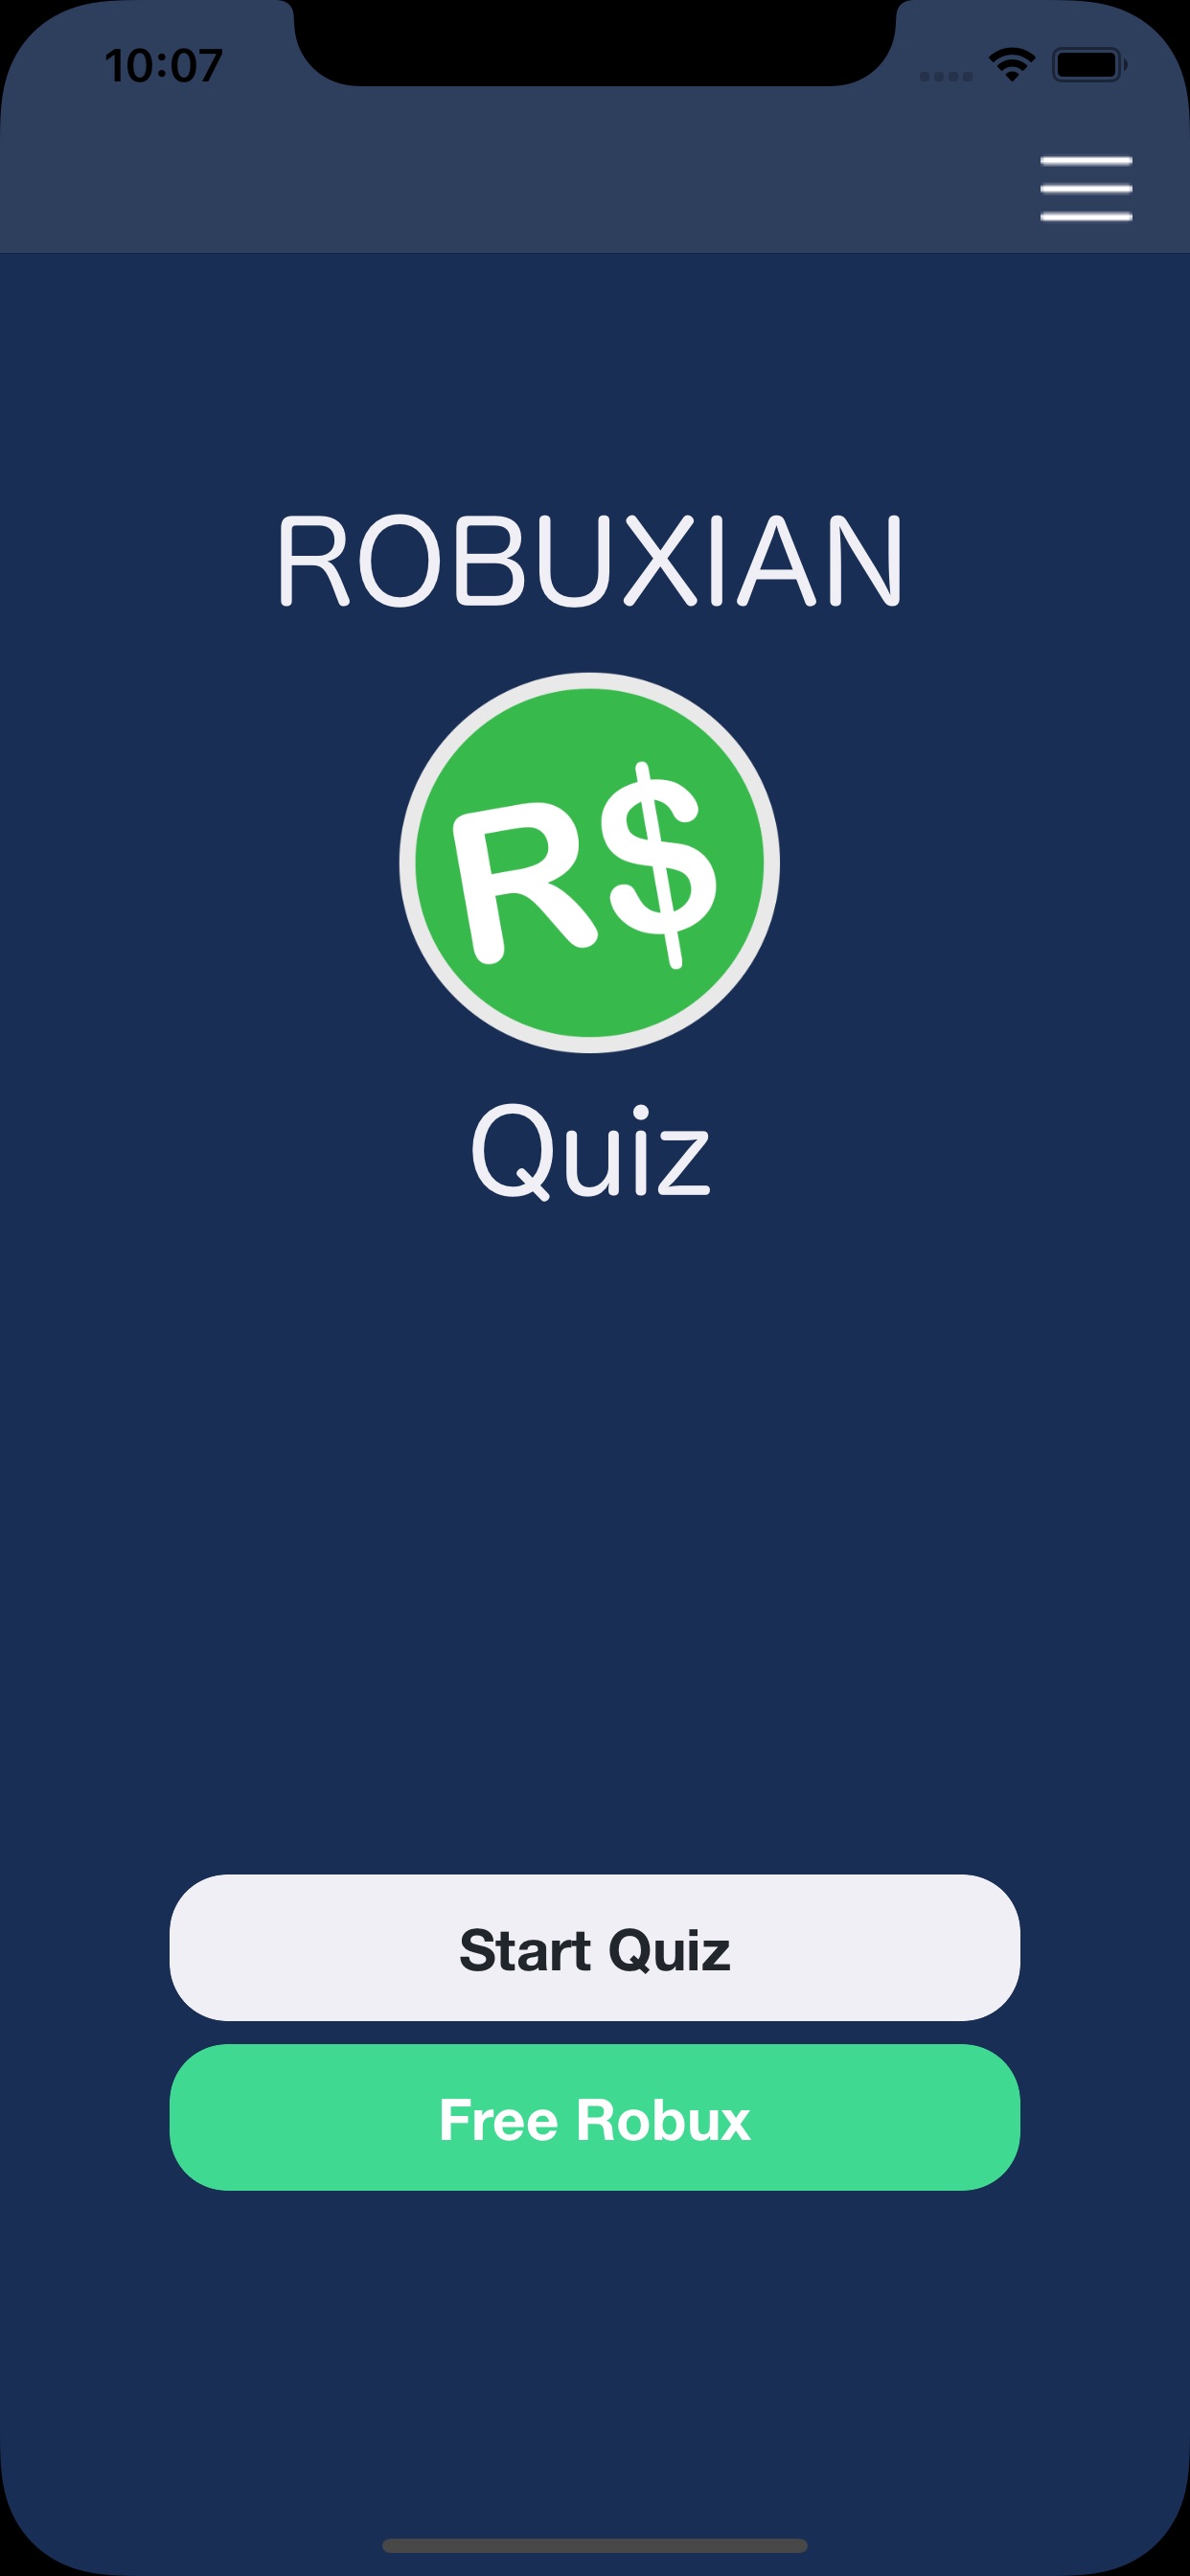 Robuxian Quiz For Robux App Store Review Aso Revenue Downloads Appfollow - how much is 599 robux how to get free robux real games